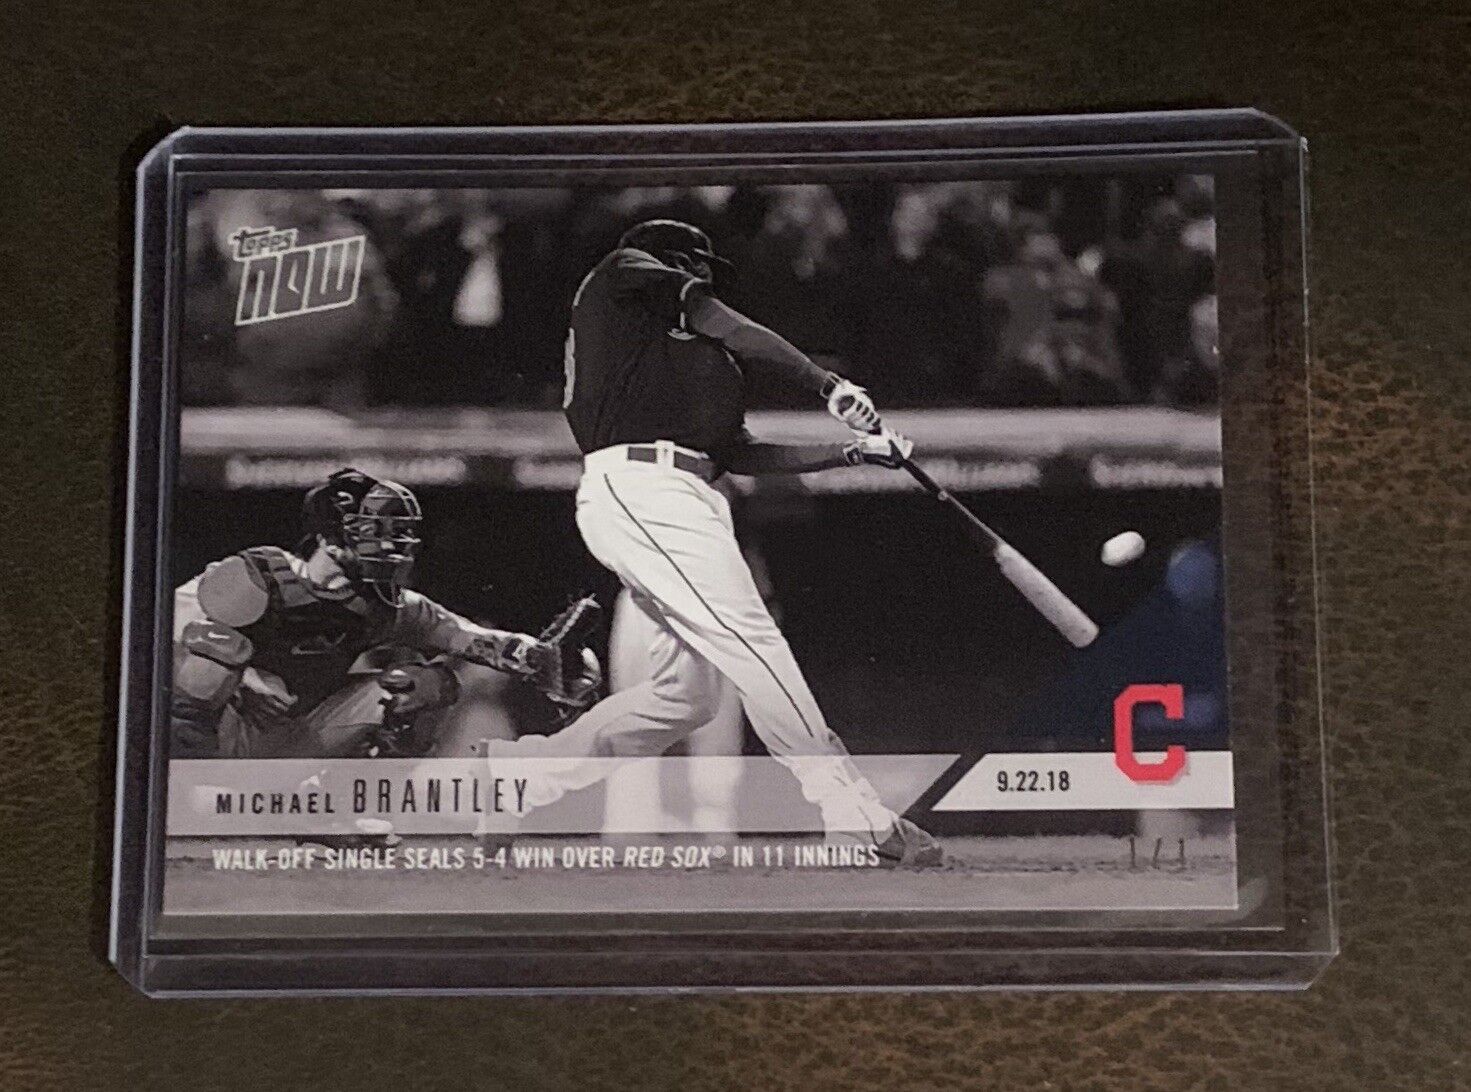 2018 TOPPS NOW #770BW MICHAEL BRANTLEY PLATINUM MEMBER ONLY B/W 1/1